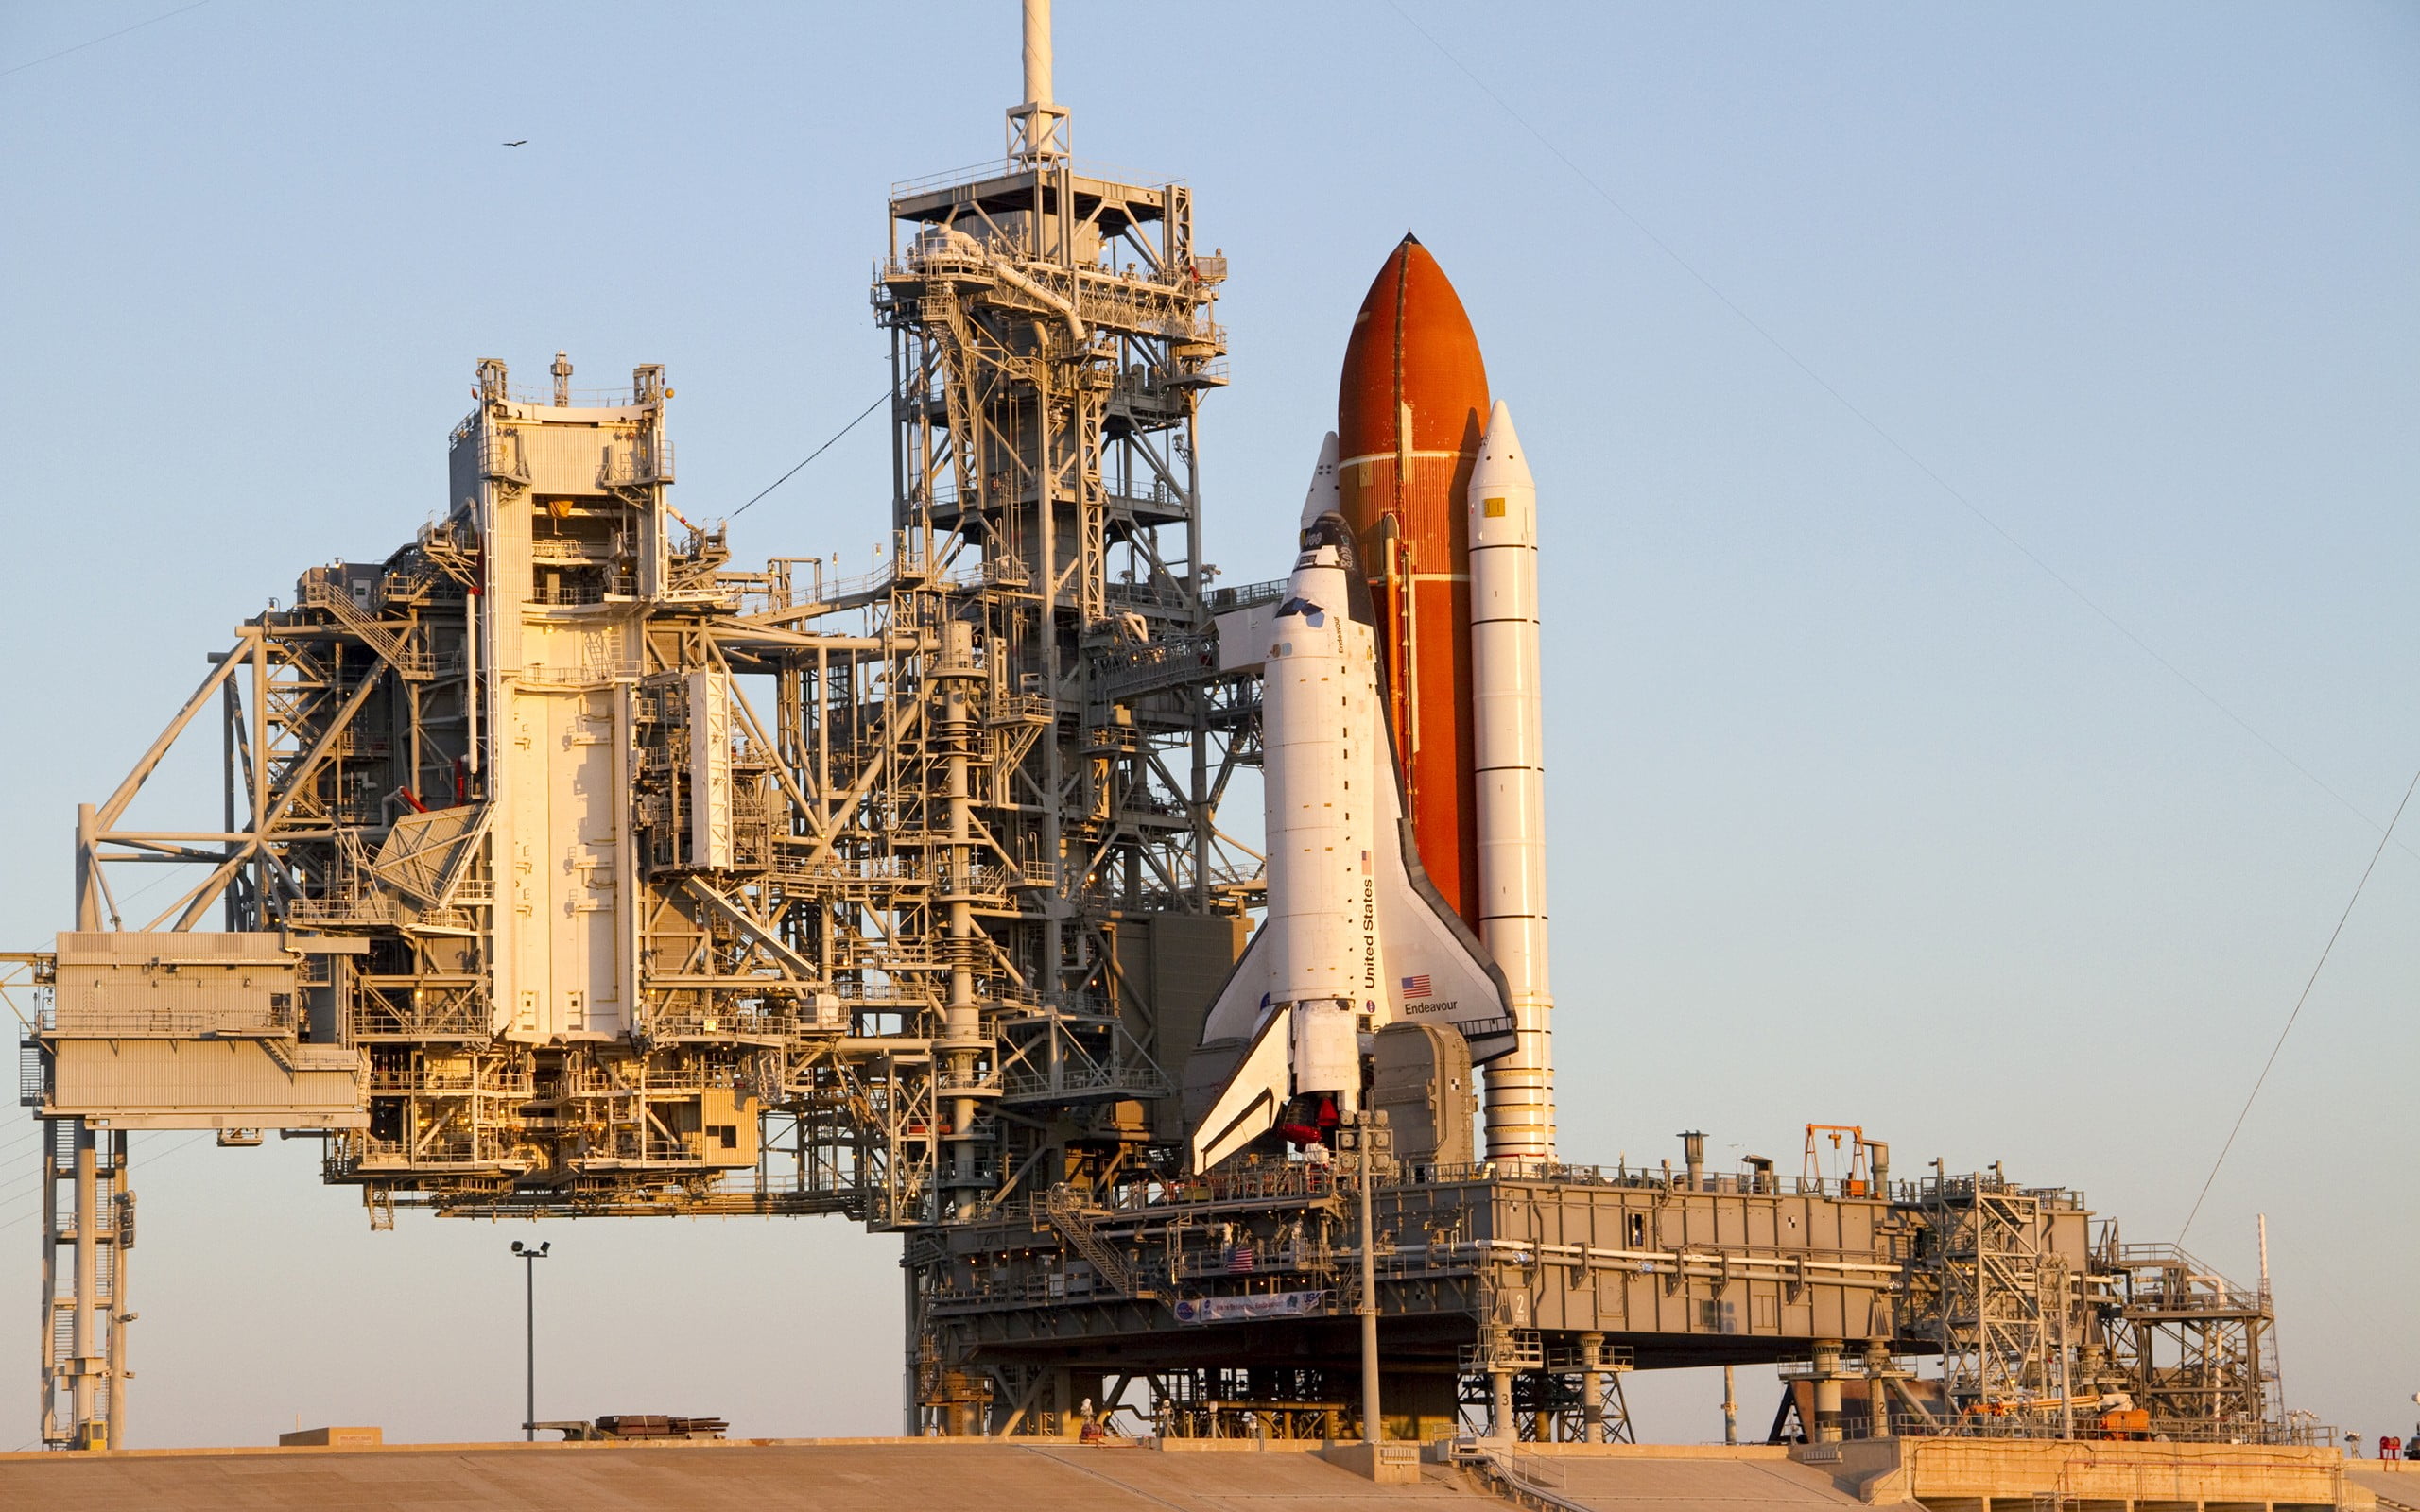 white and red space shuttle, Space Shuttle Endeavour, NASA, launch pads